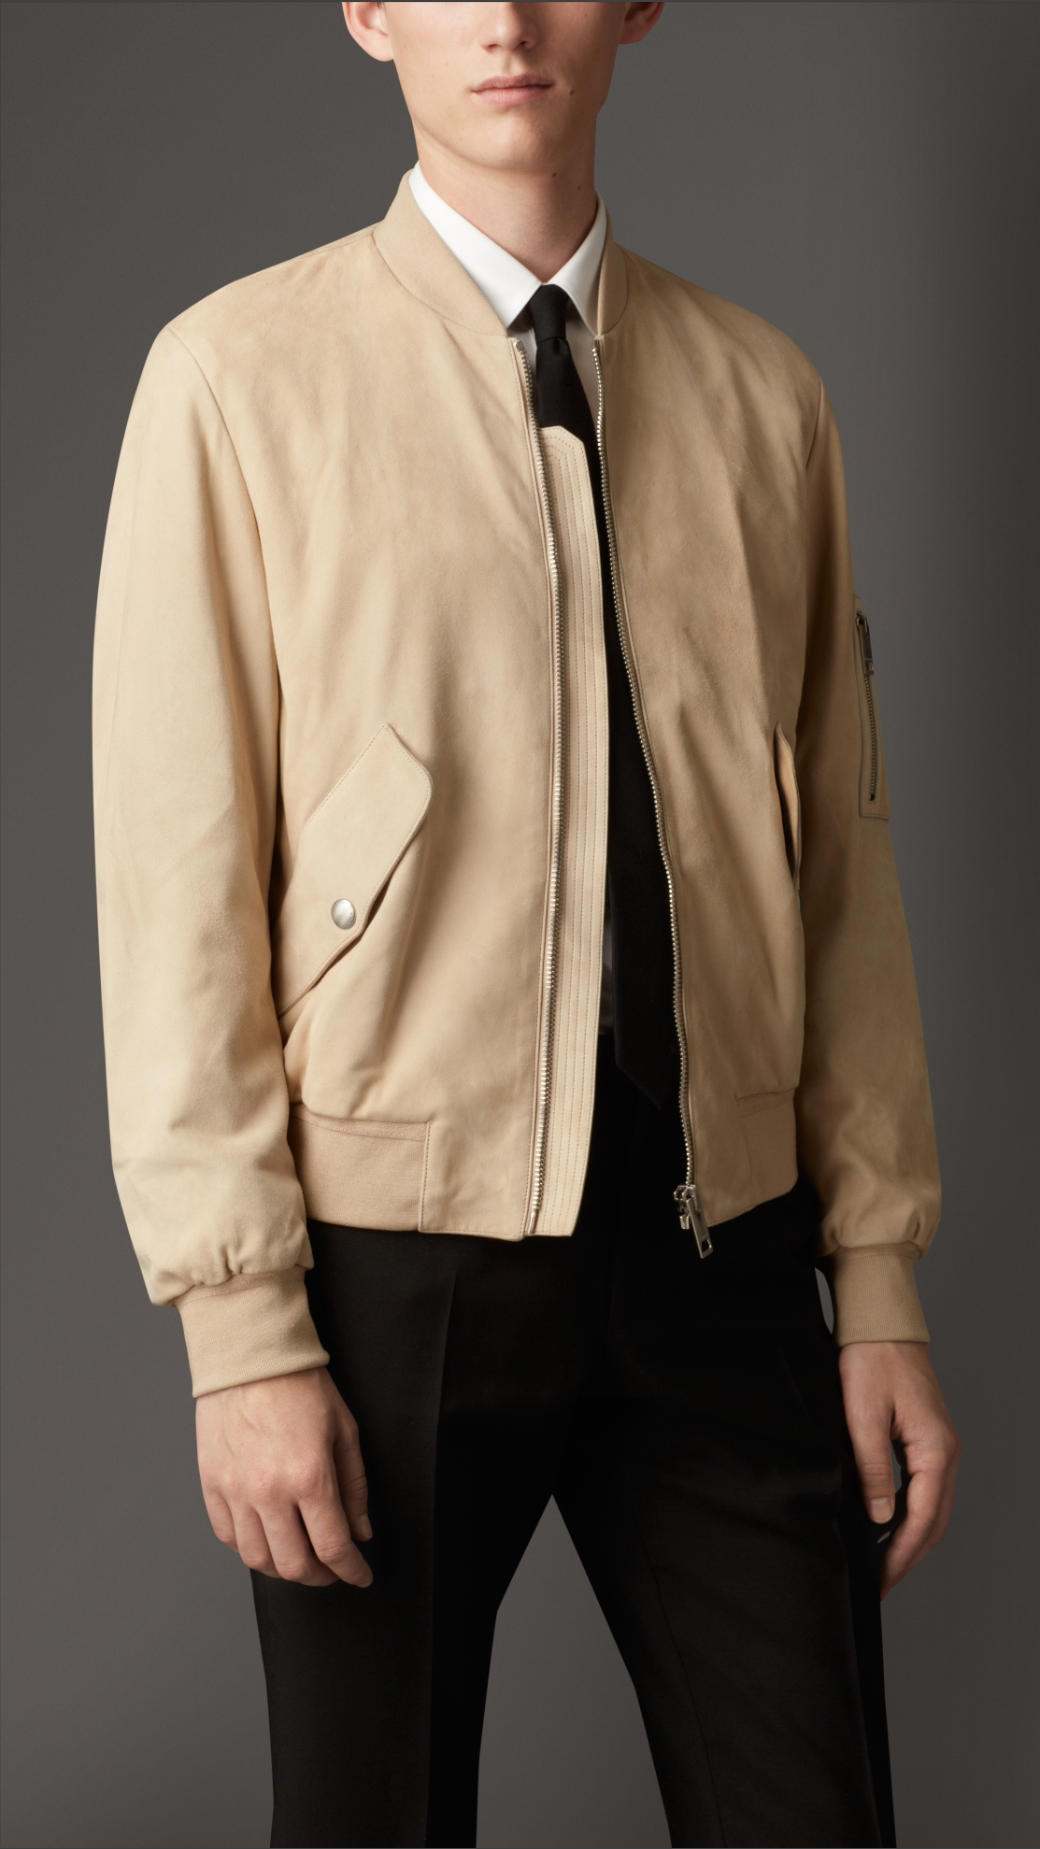 Burberry Suede Bomber Jacket in Stone (Natural) for Men - Lyst